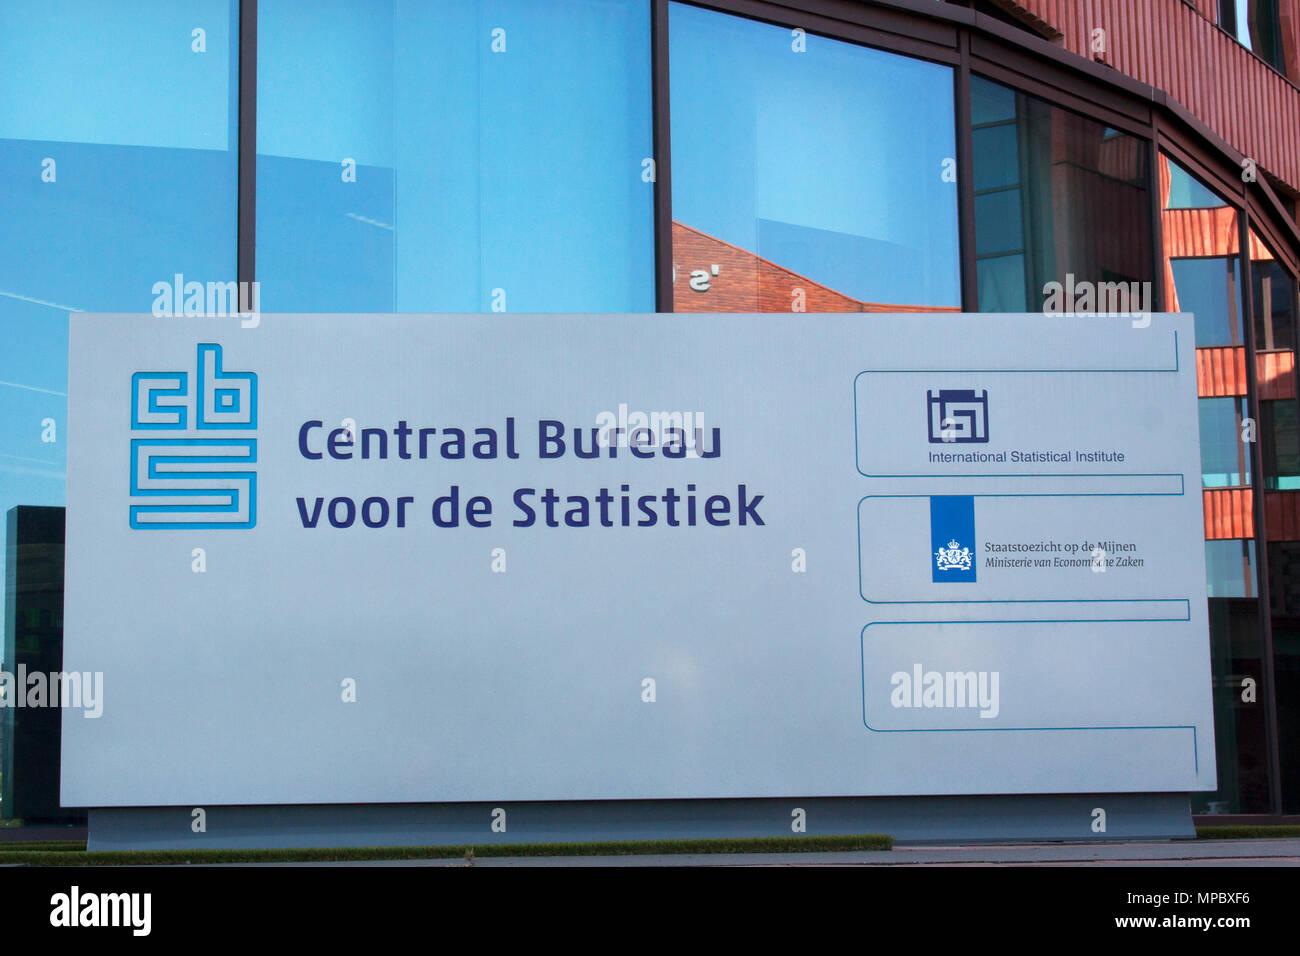 Amsterdam,Netherlands-august 7, 2015: The Central Bureau of Statistics (CBS) in the Netherlands is the authority under which the collection, processin Stock Photo